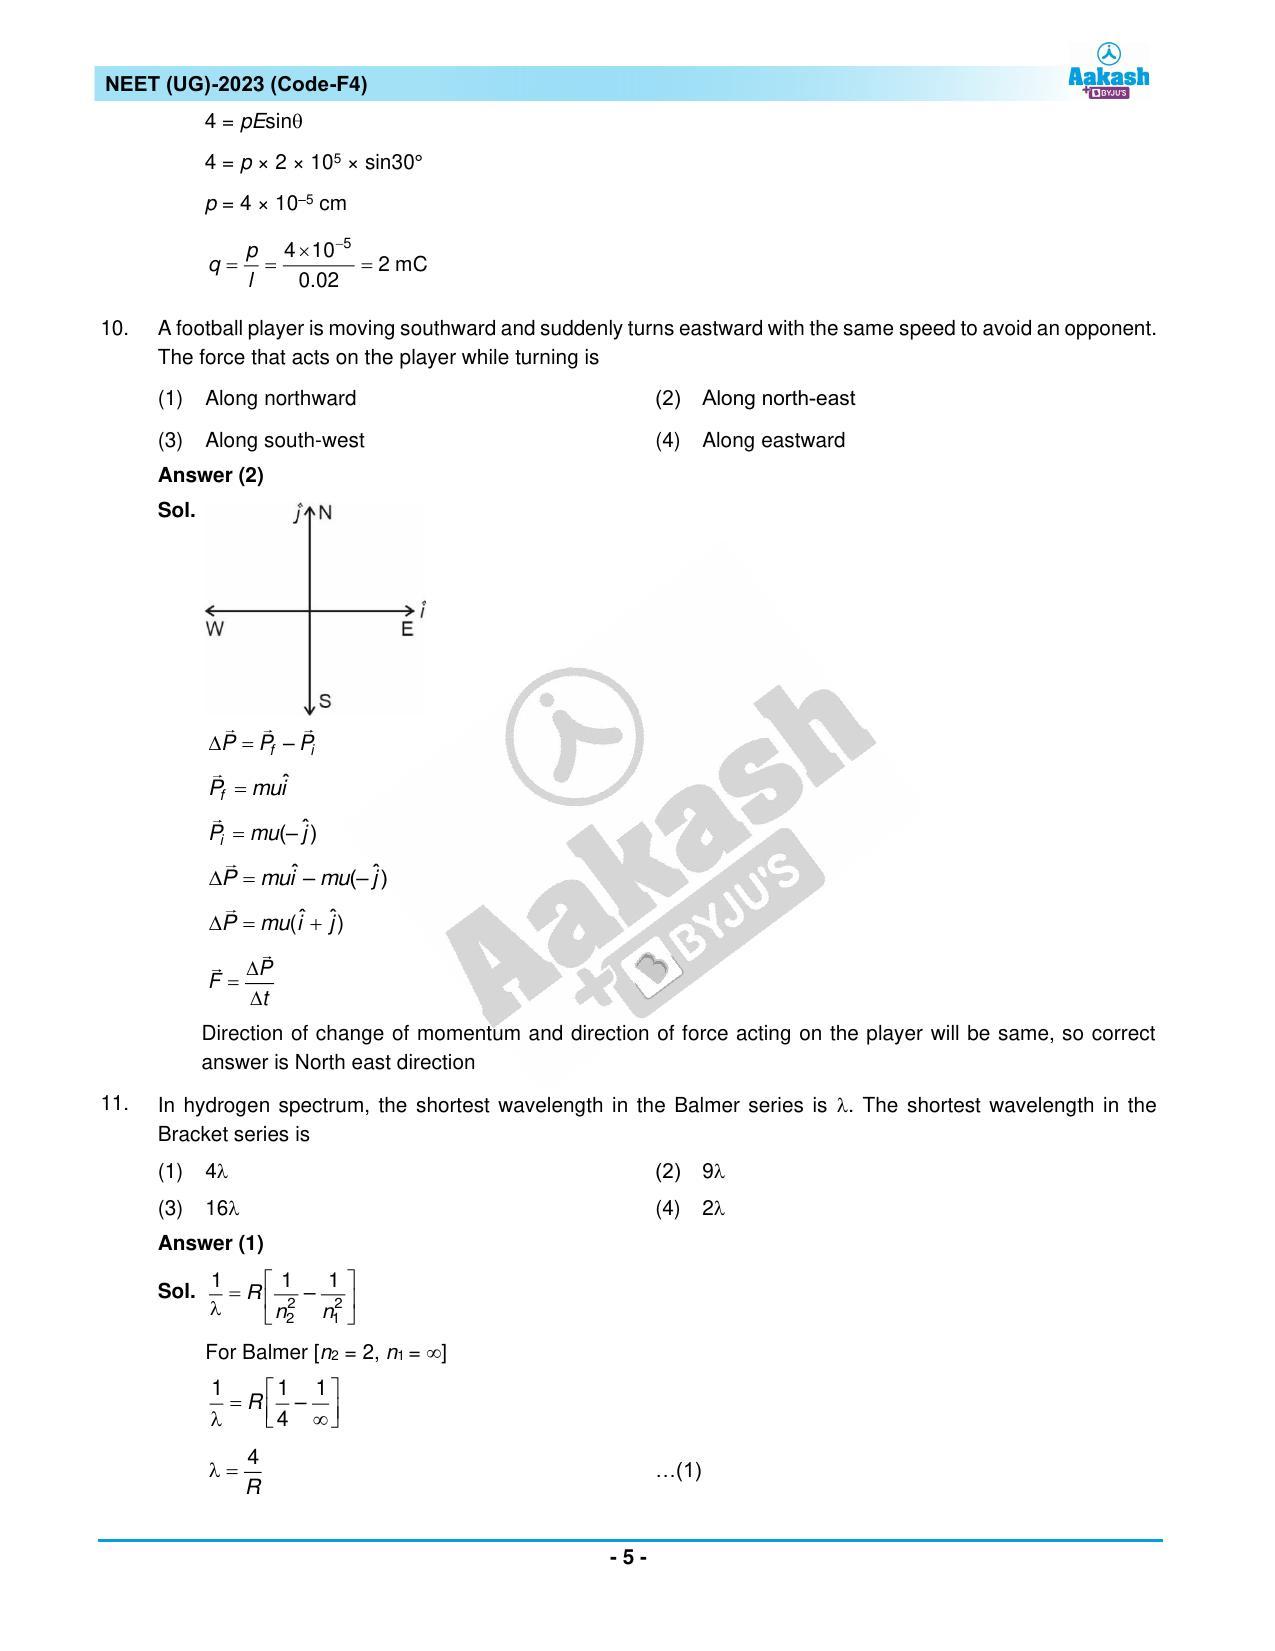 NEET 2023 Question Paper F4 - Page 5